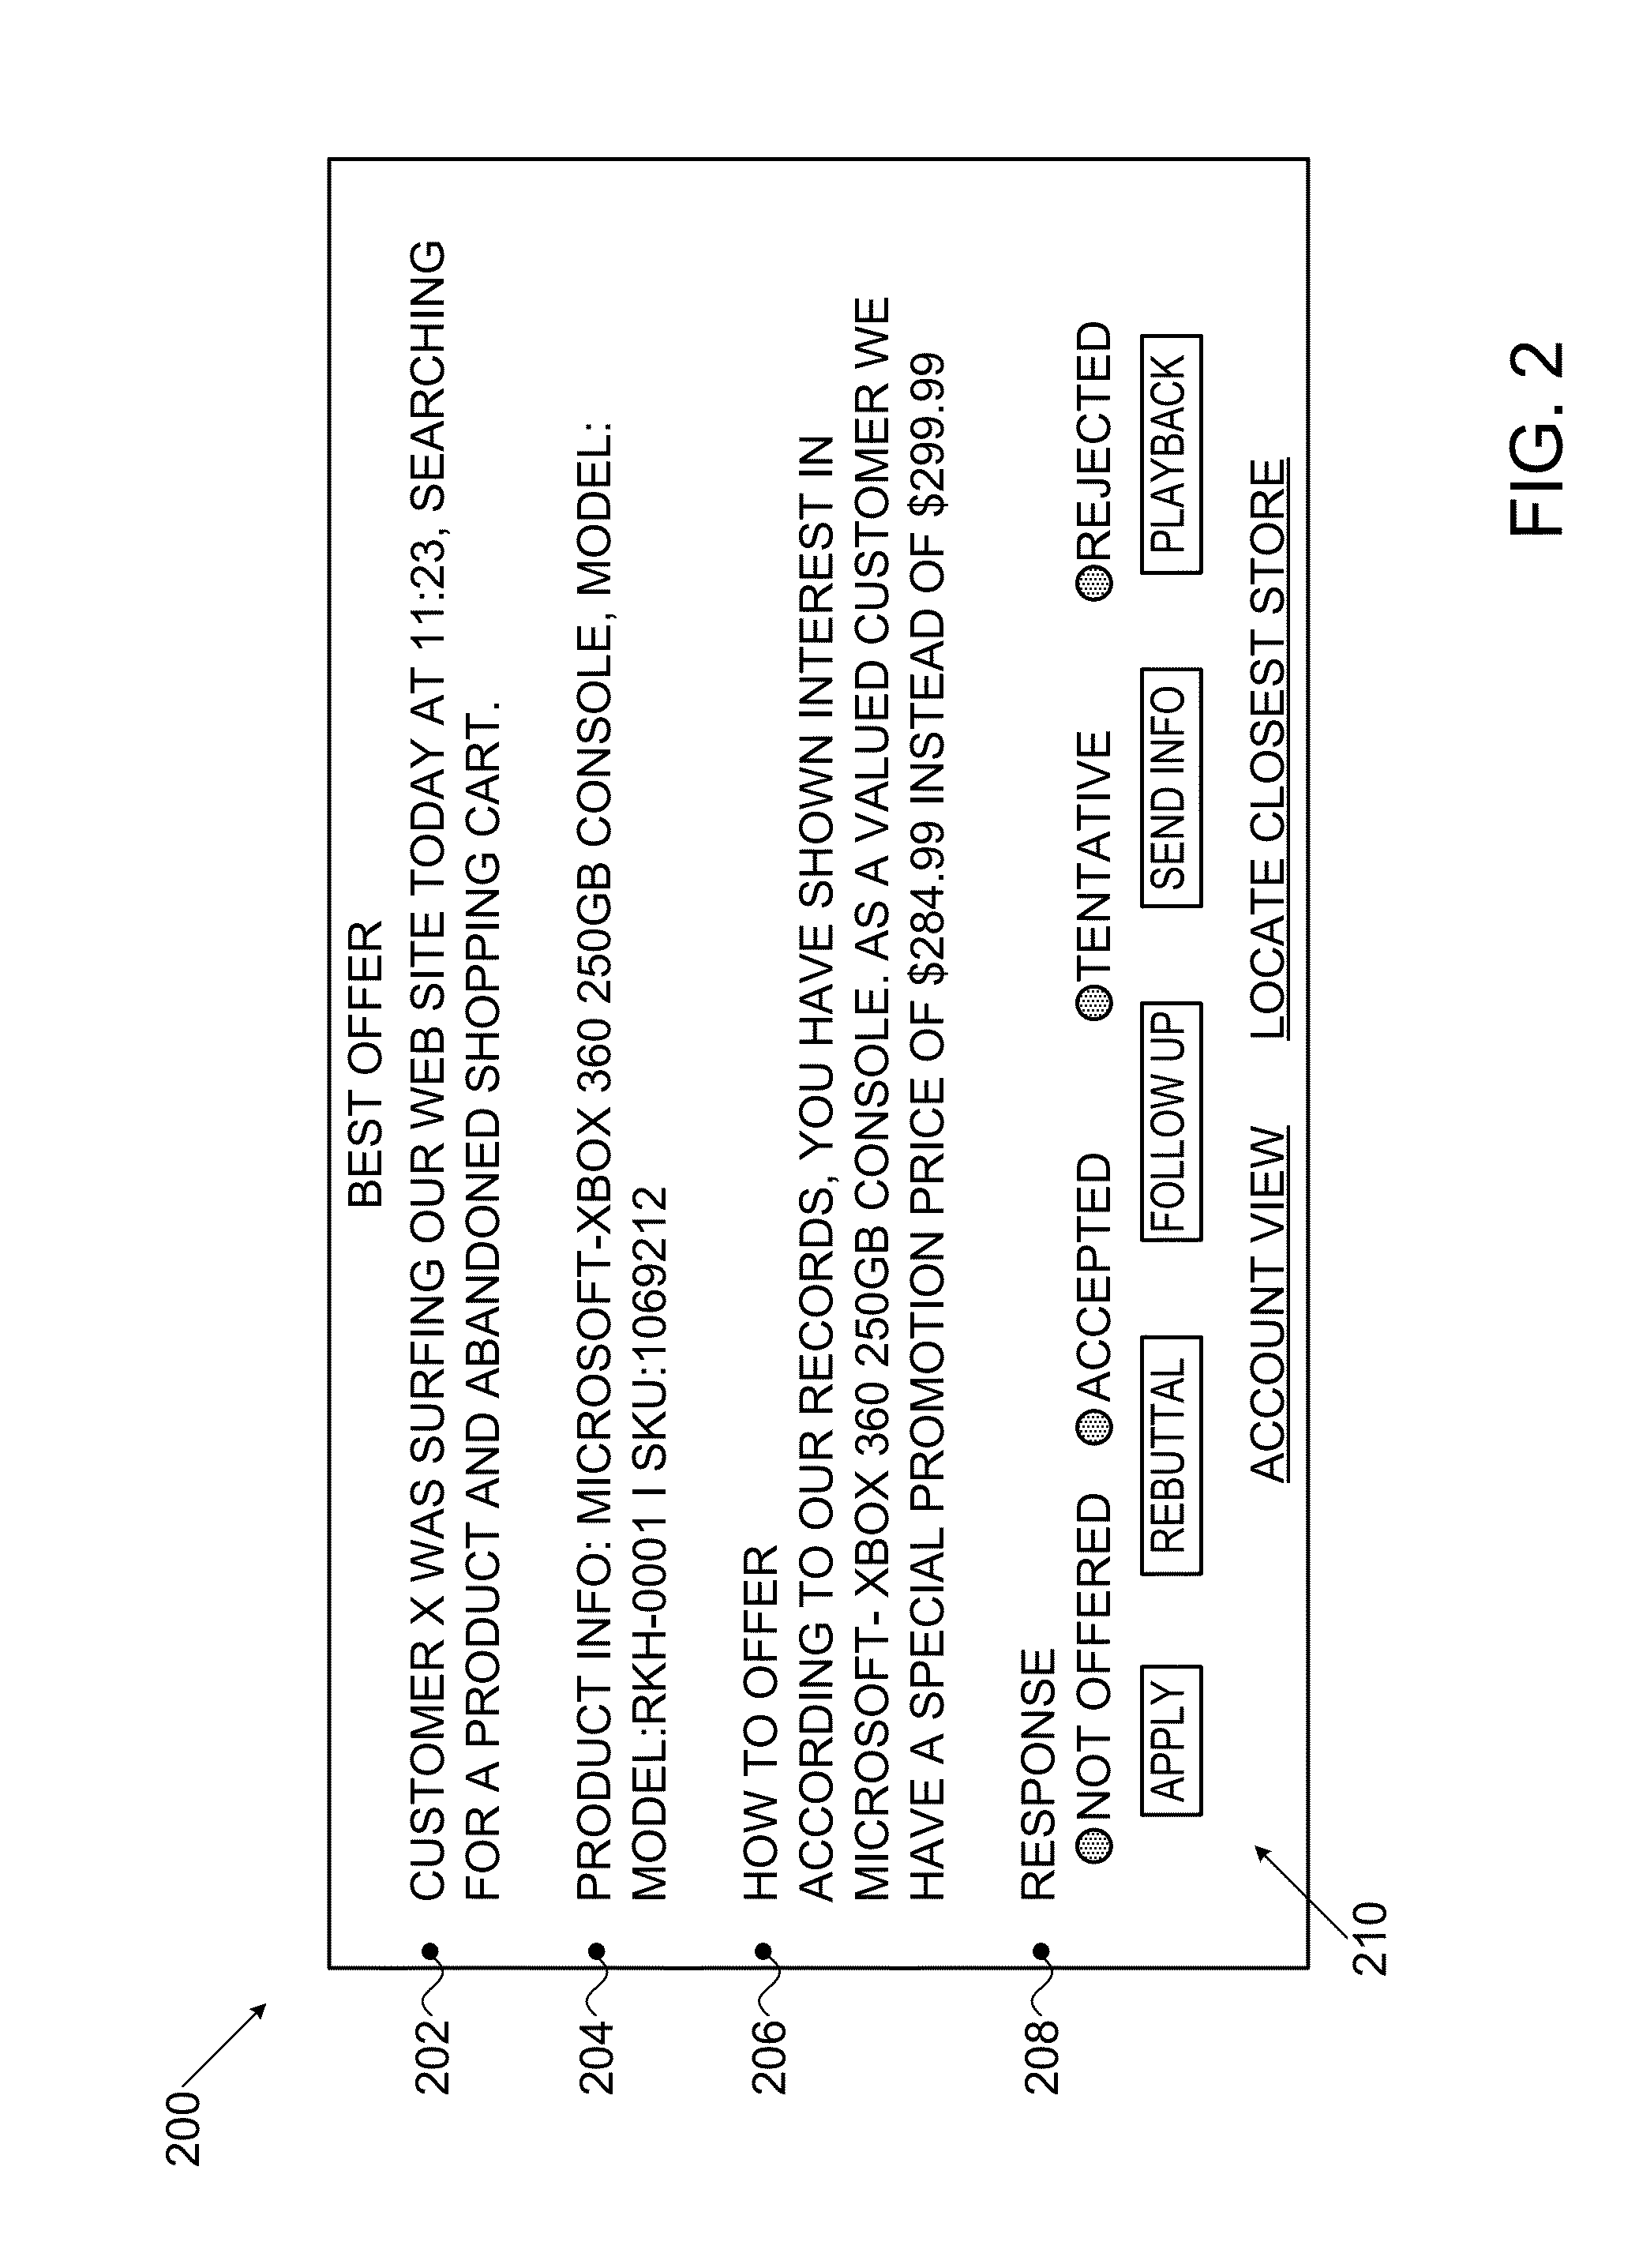 System and method for tracking web interactions with real time analytics